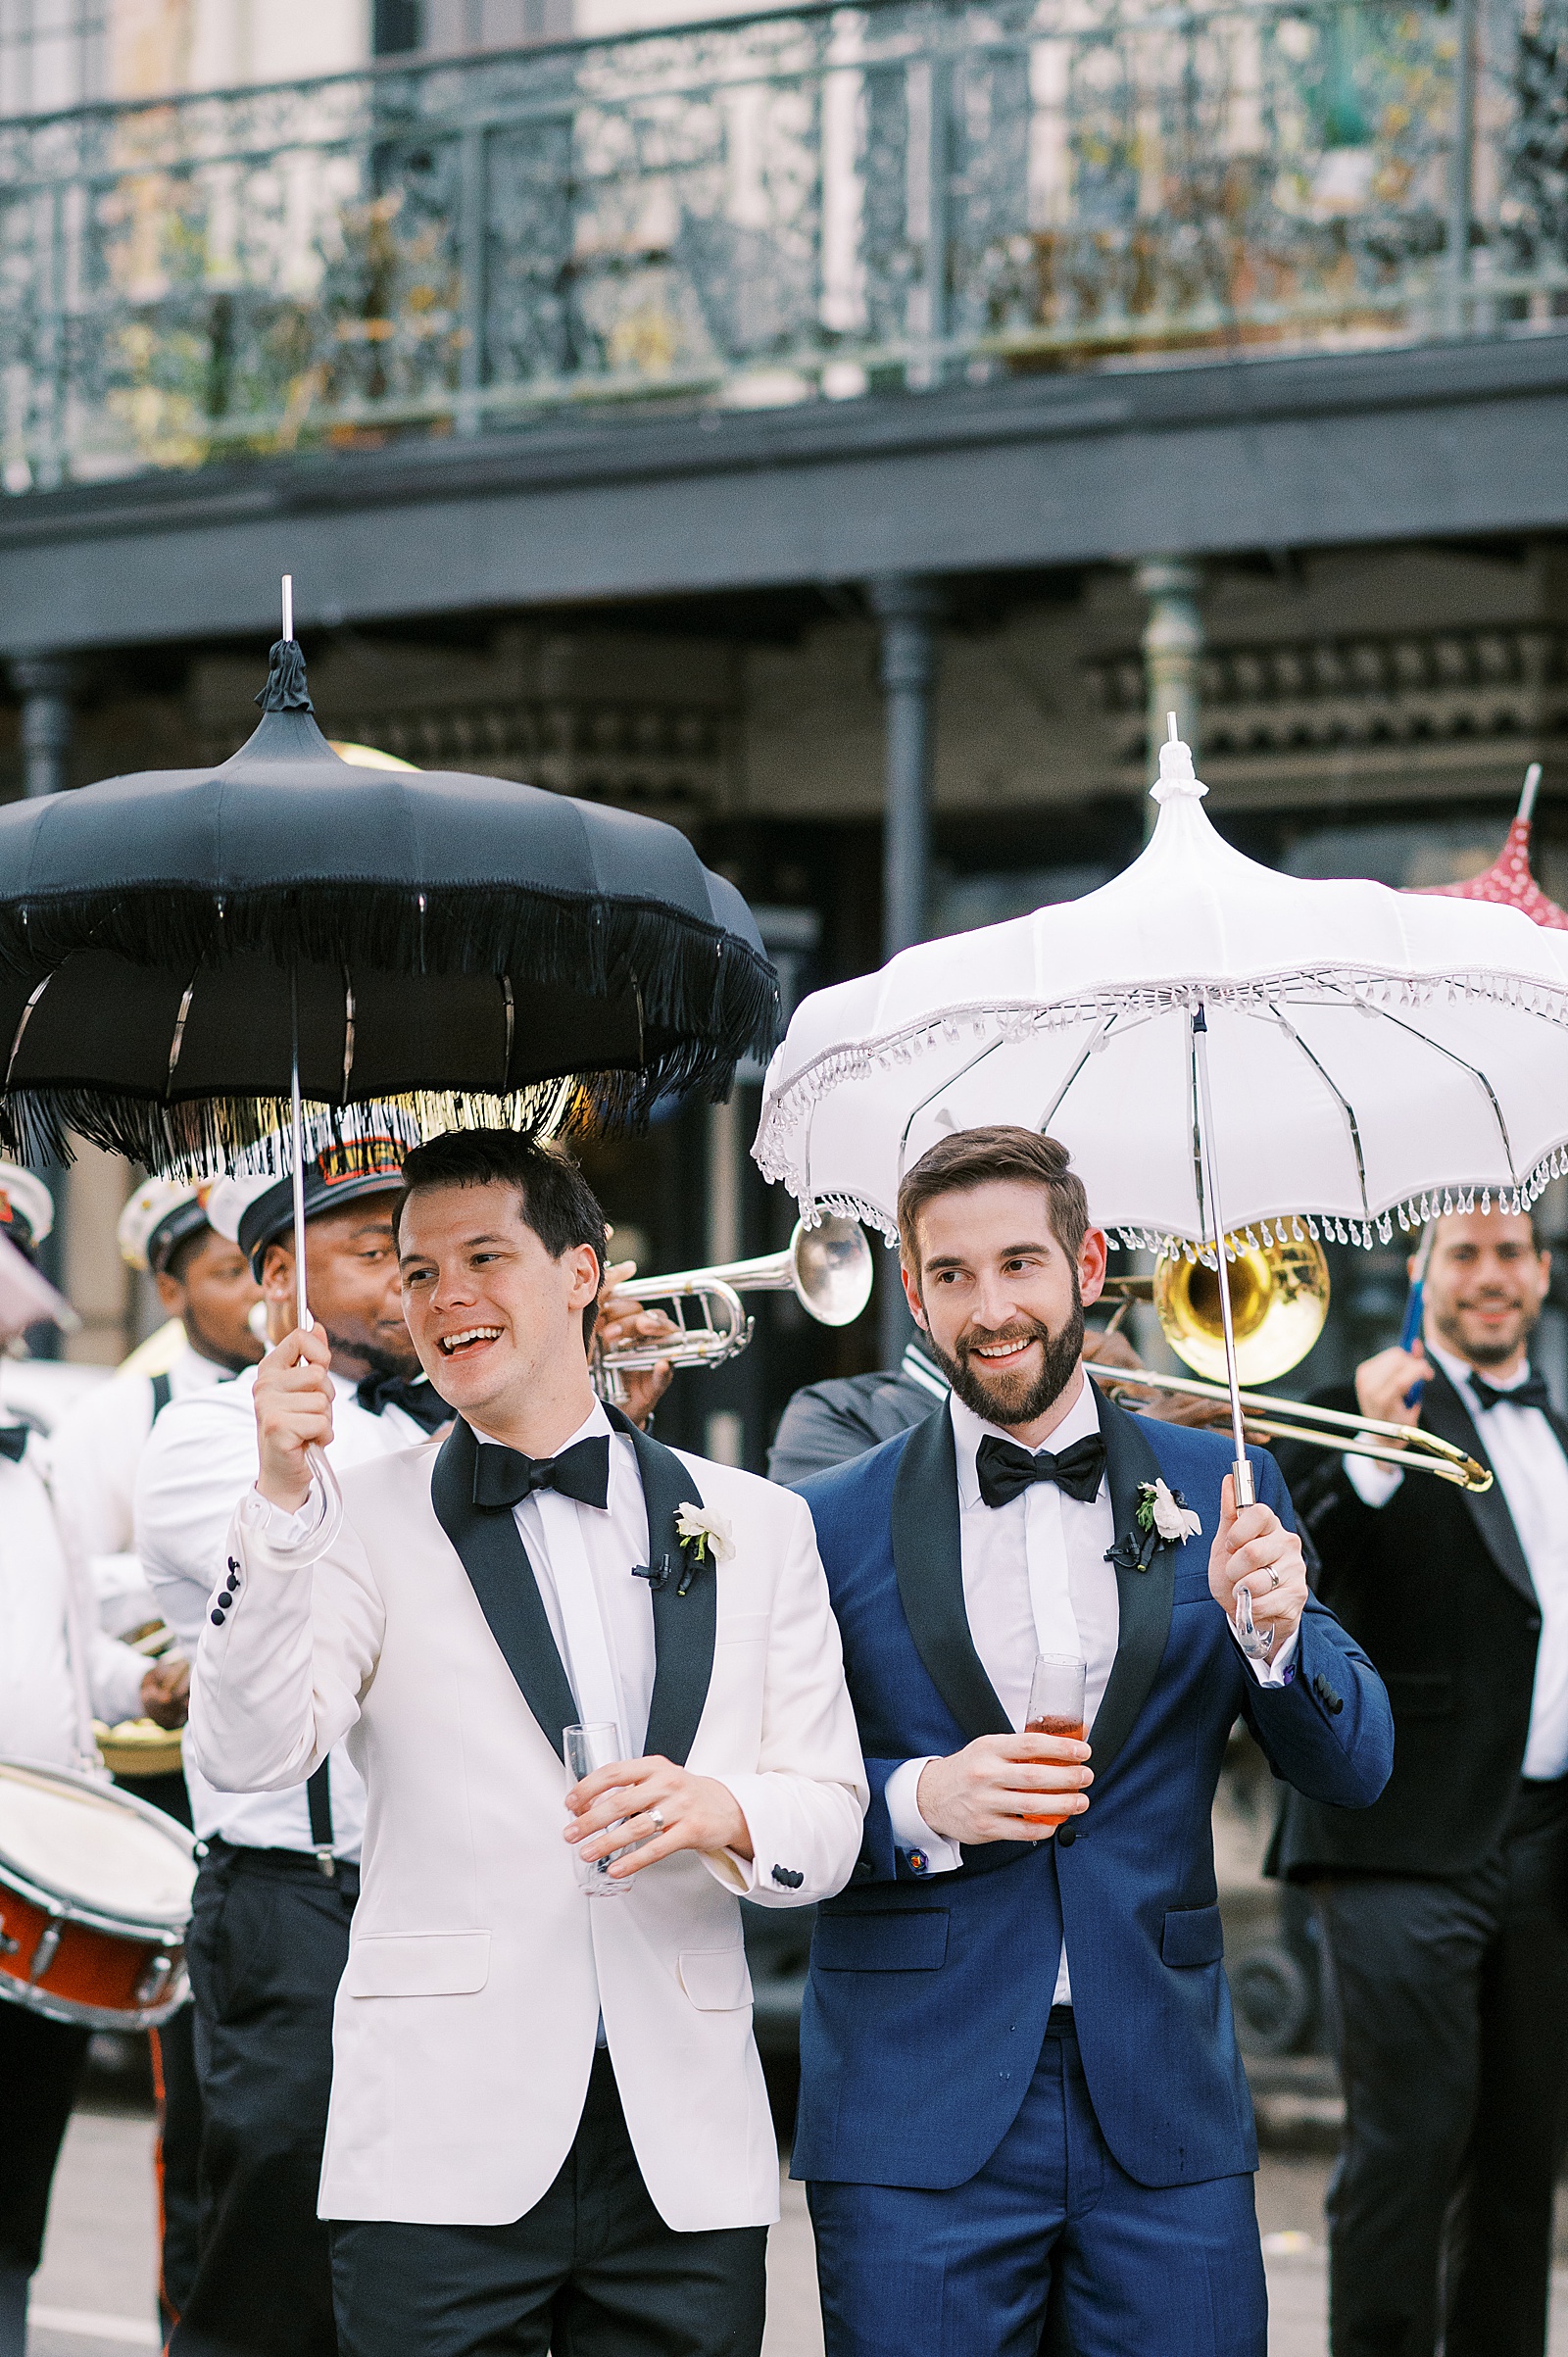 Two grooms stand side by side in a New Orleans street during a wedding second line.